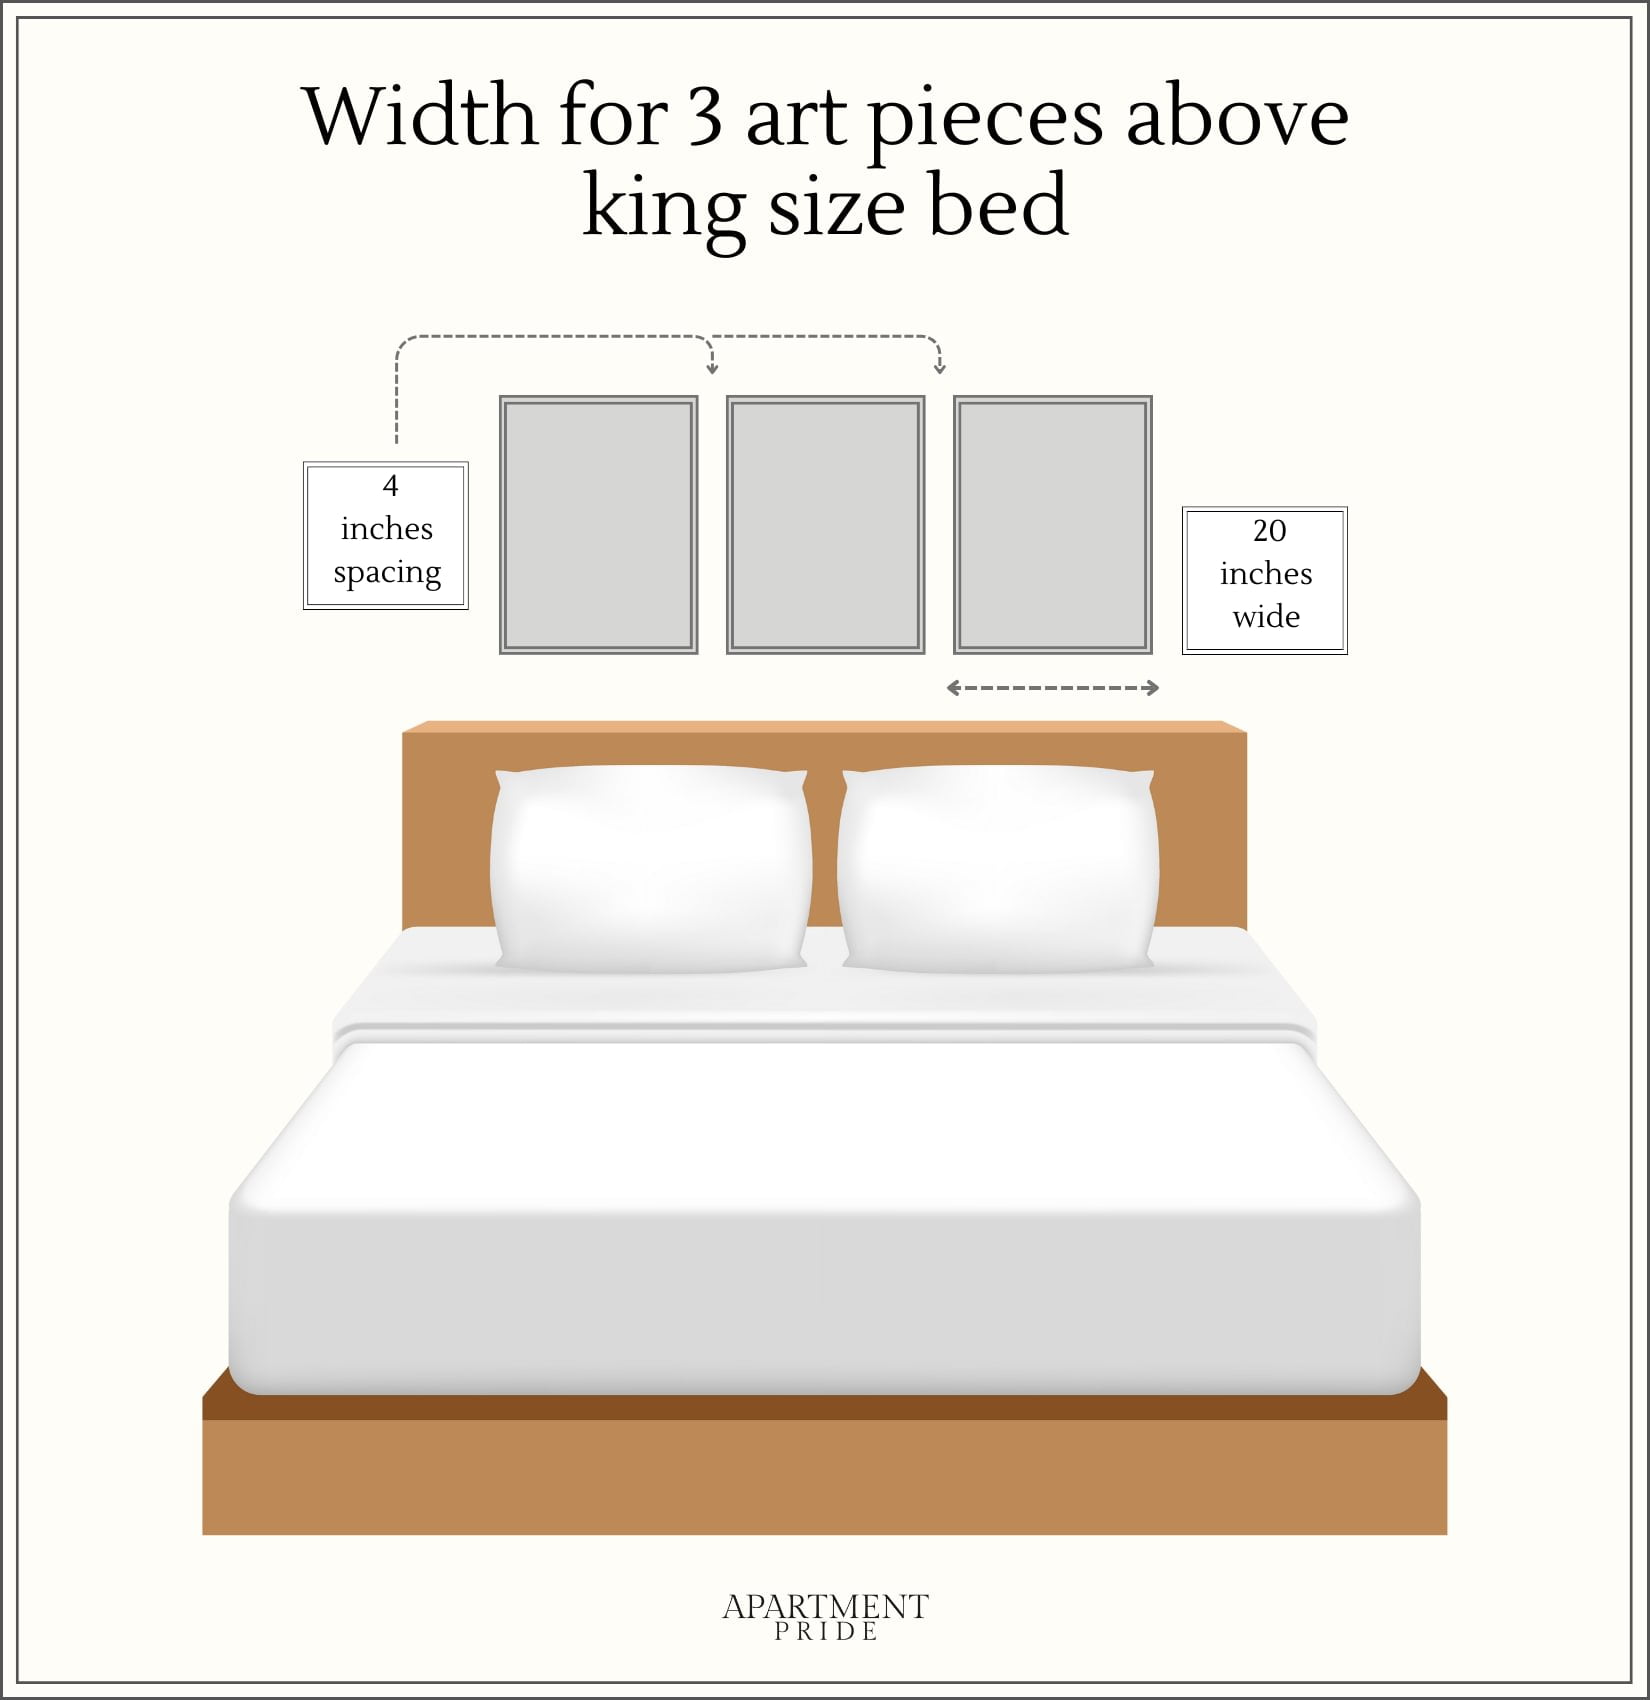 Width measurements for 3 pieces of art above king bed